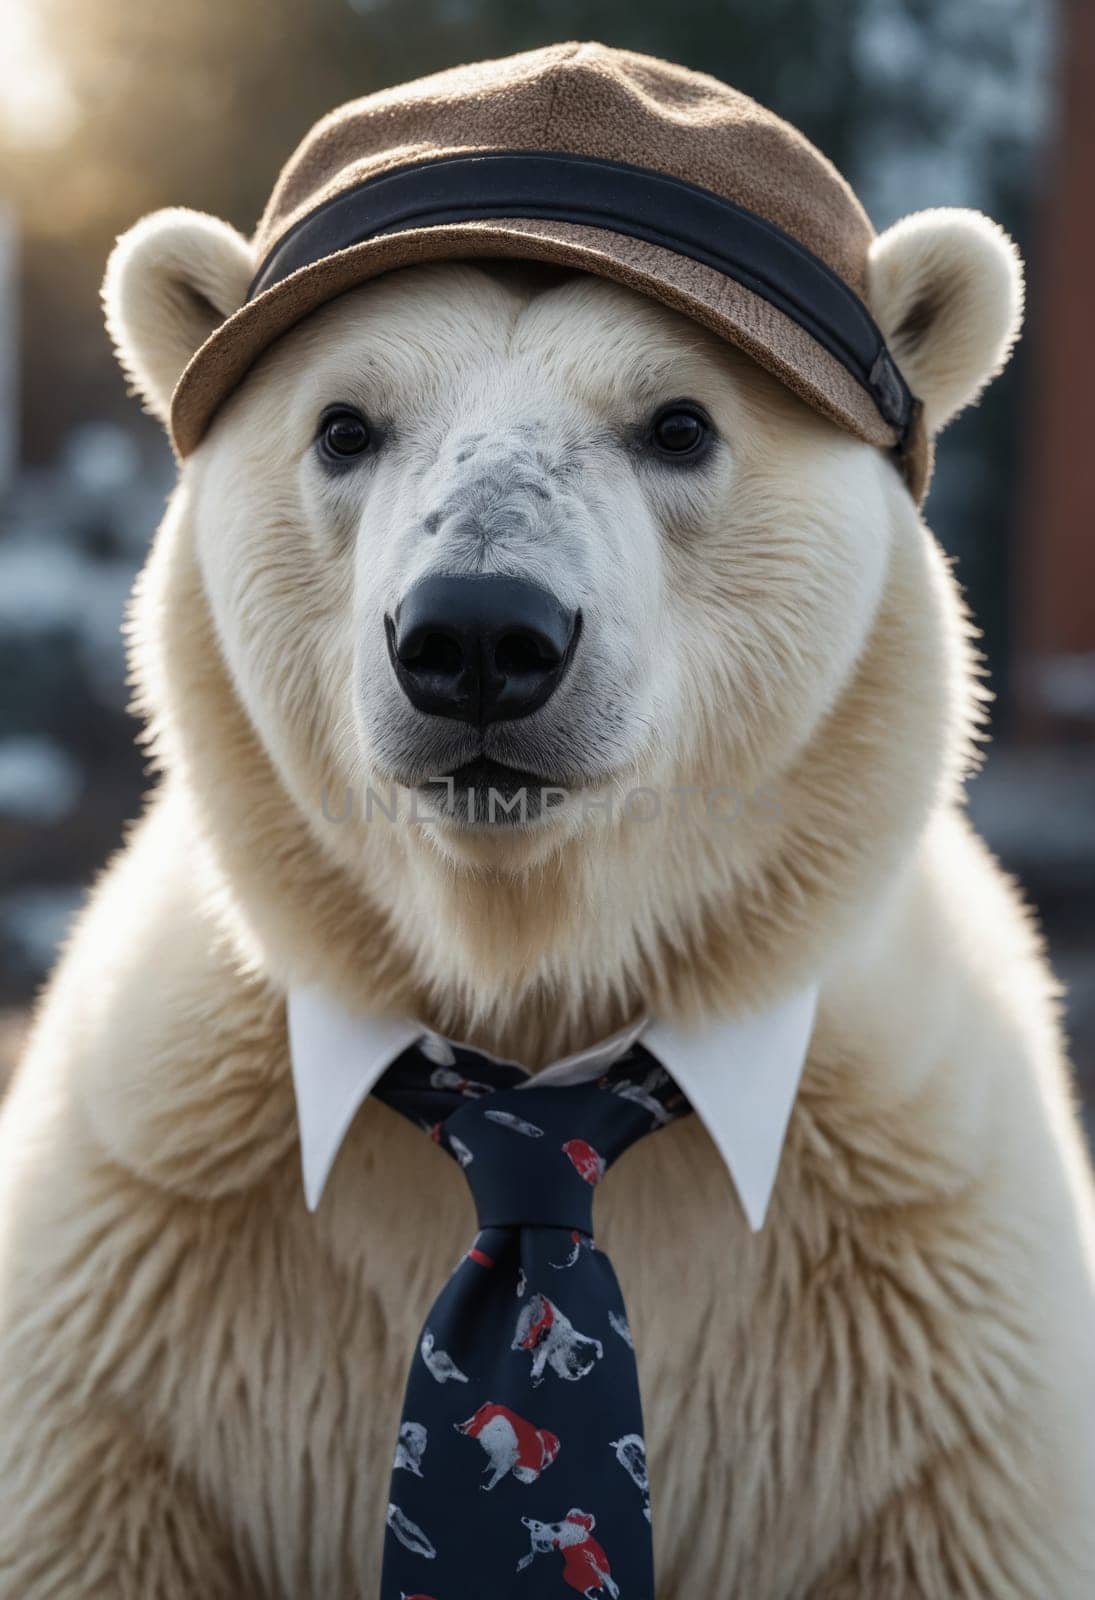 Quirky Couture: Polar Bear Transforms into a Gentlebea by Andre1ns